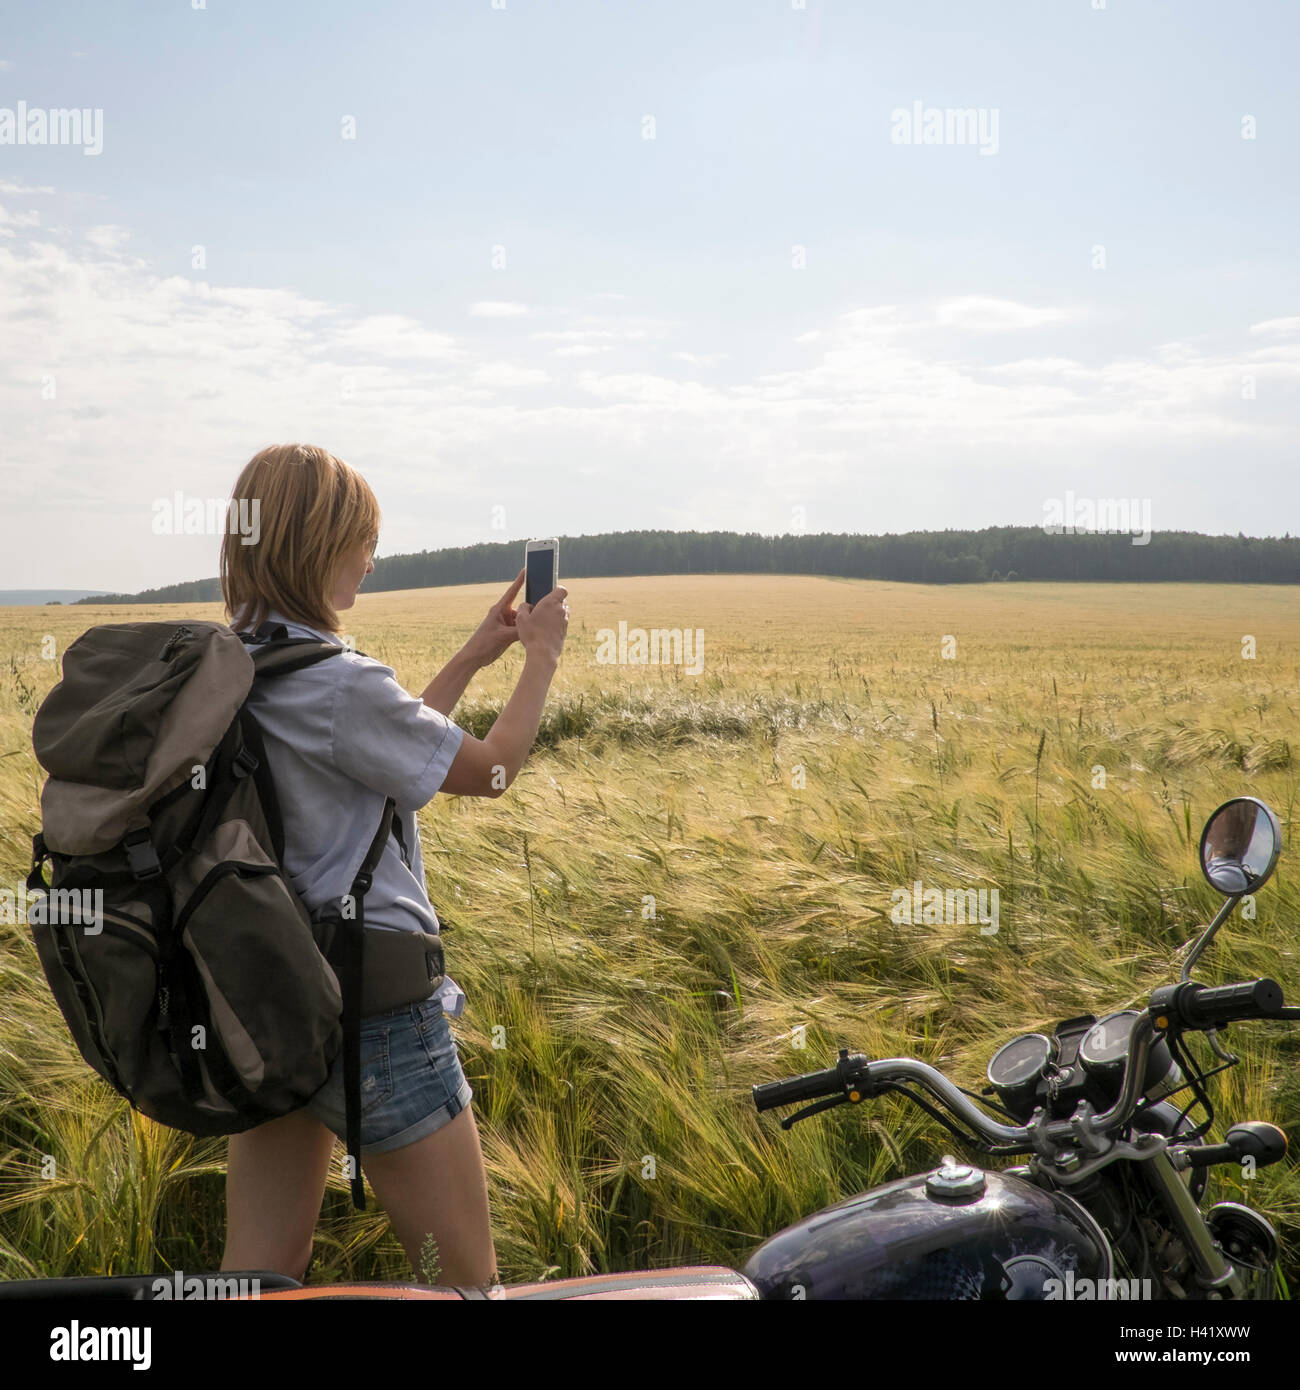 Caucasian woman standing in field near motorcycle using cell phone Banque D'Images